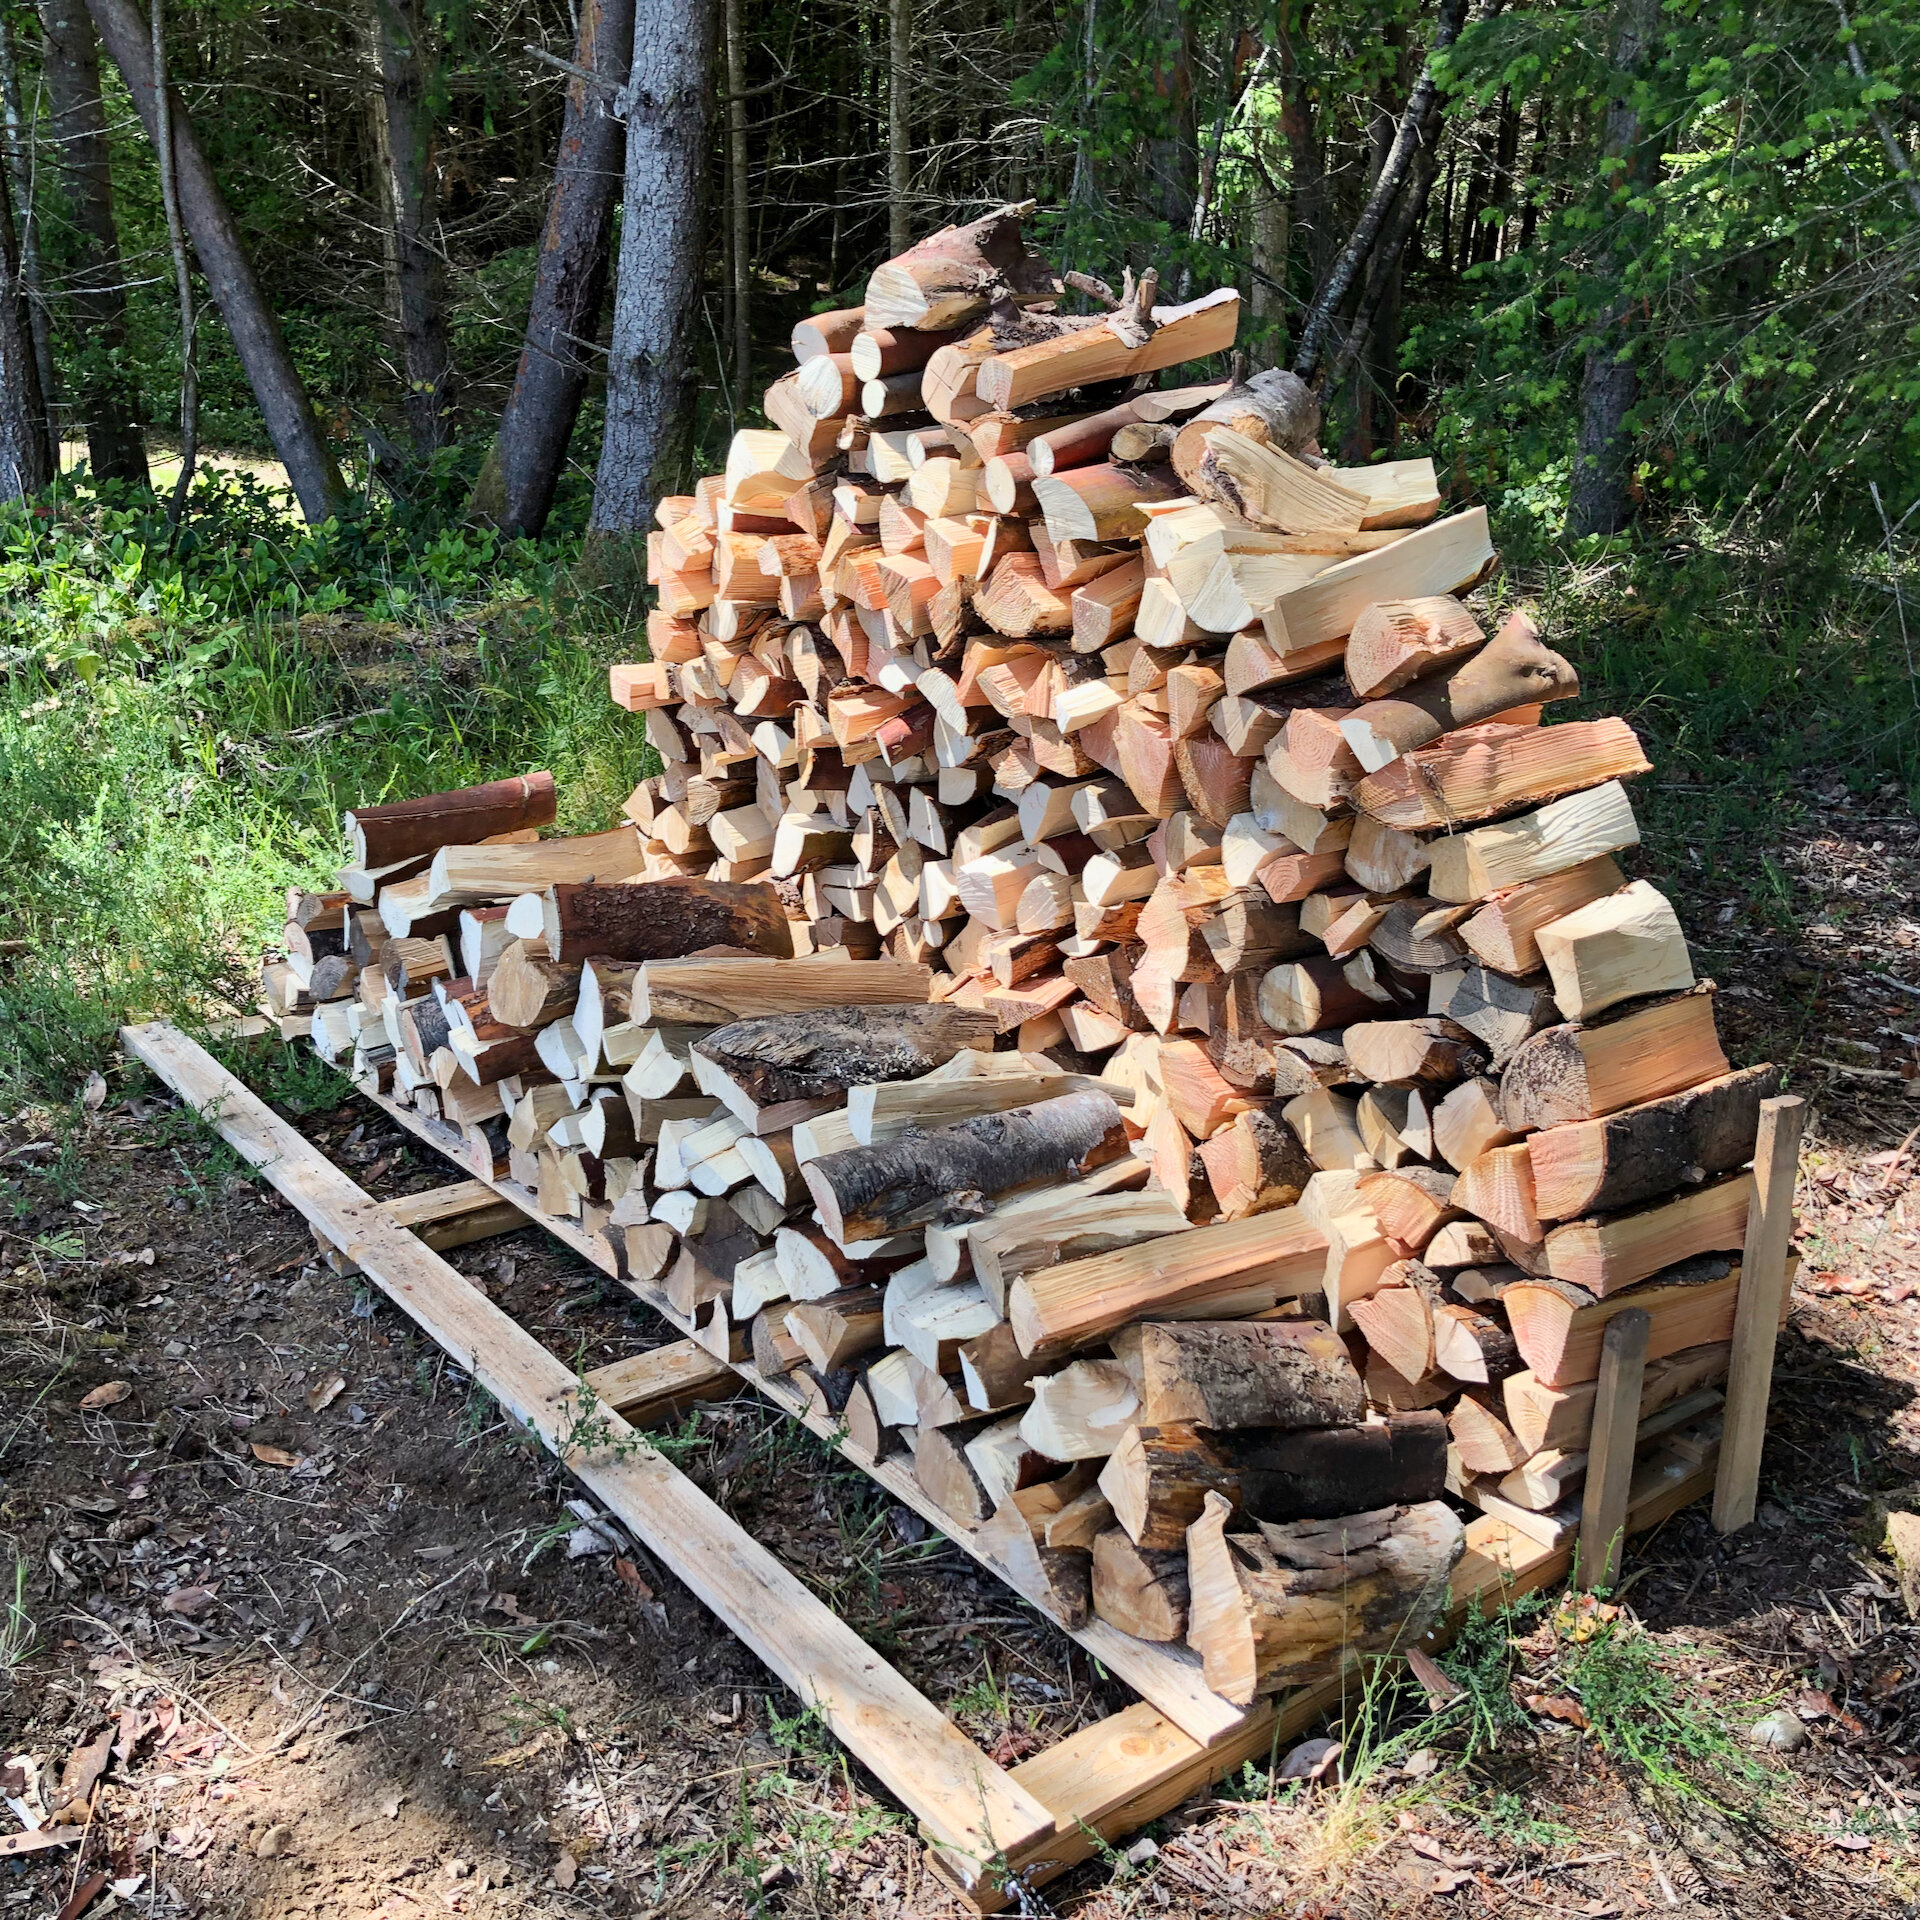  The initial pile of logs quickly became a pretty decent sized stack of firewood. 